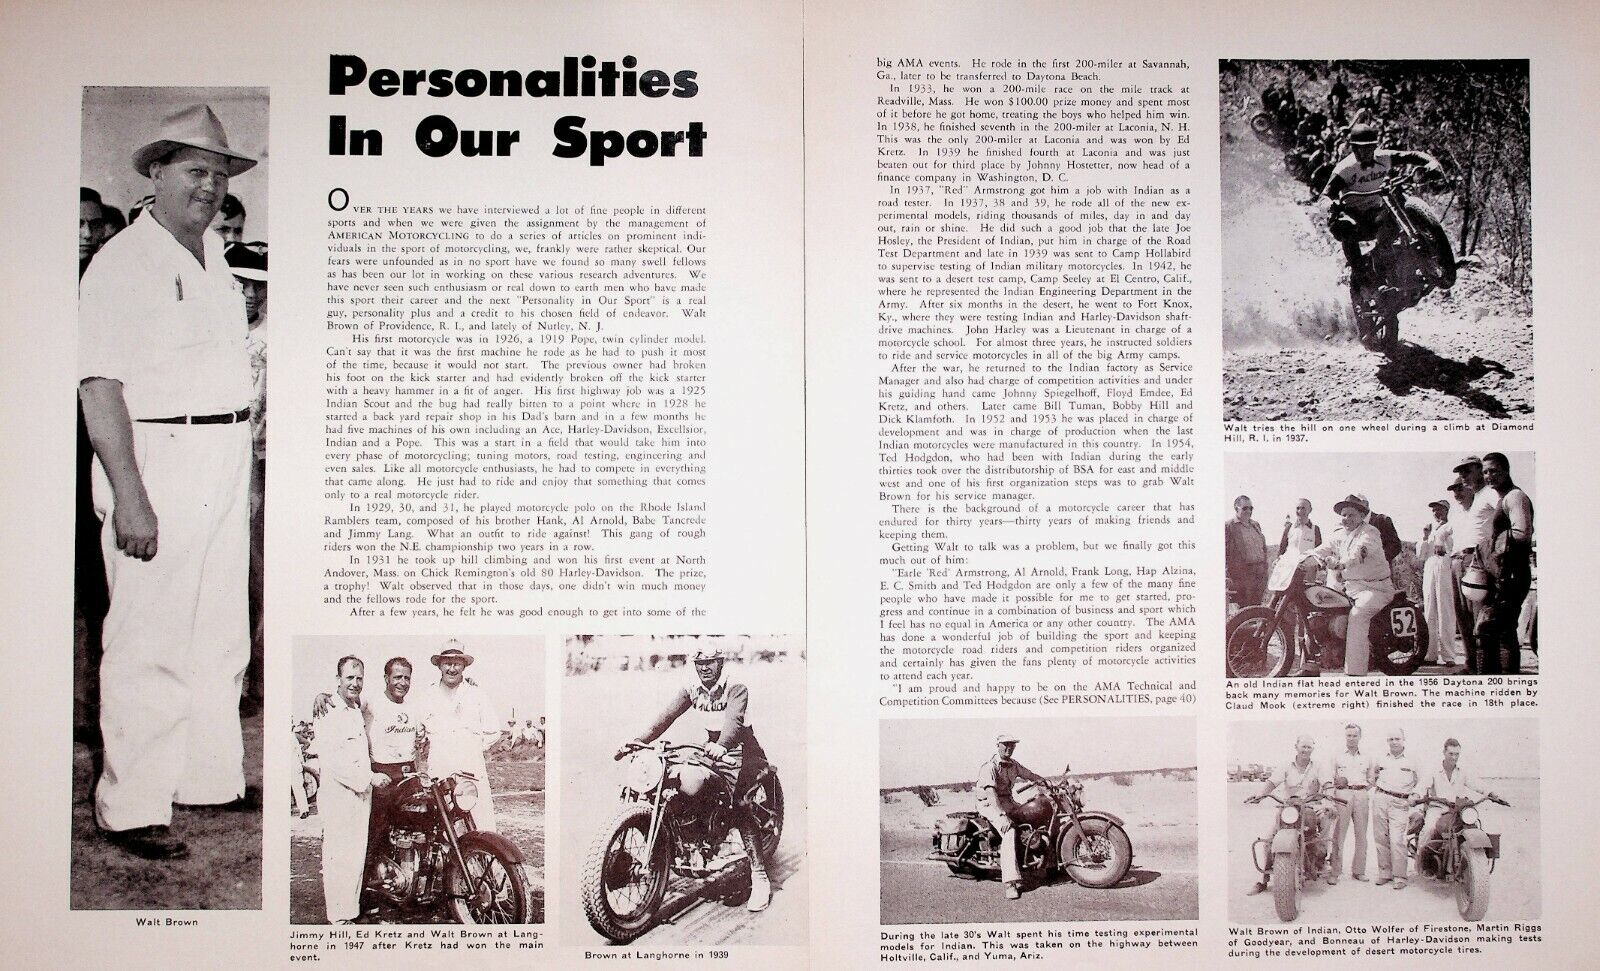 1957 Providence Rhode Island Motorcyclist Walt Brown - 3-Page Vintage Article